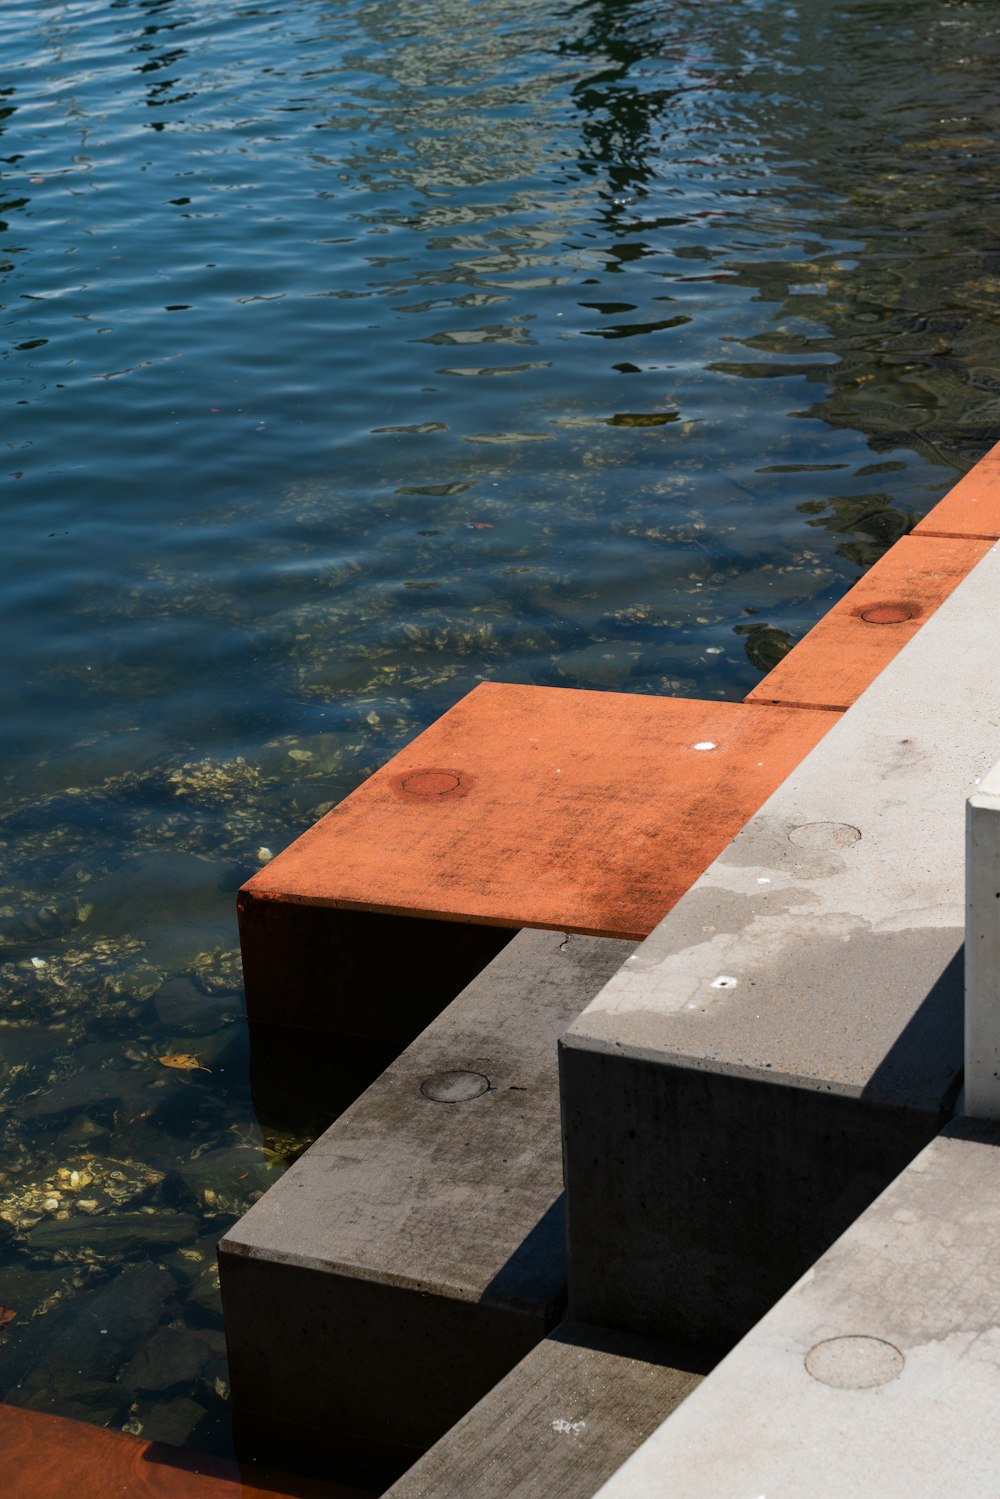 a concrete dock with a red and white buoy sitting on top of it